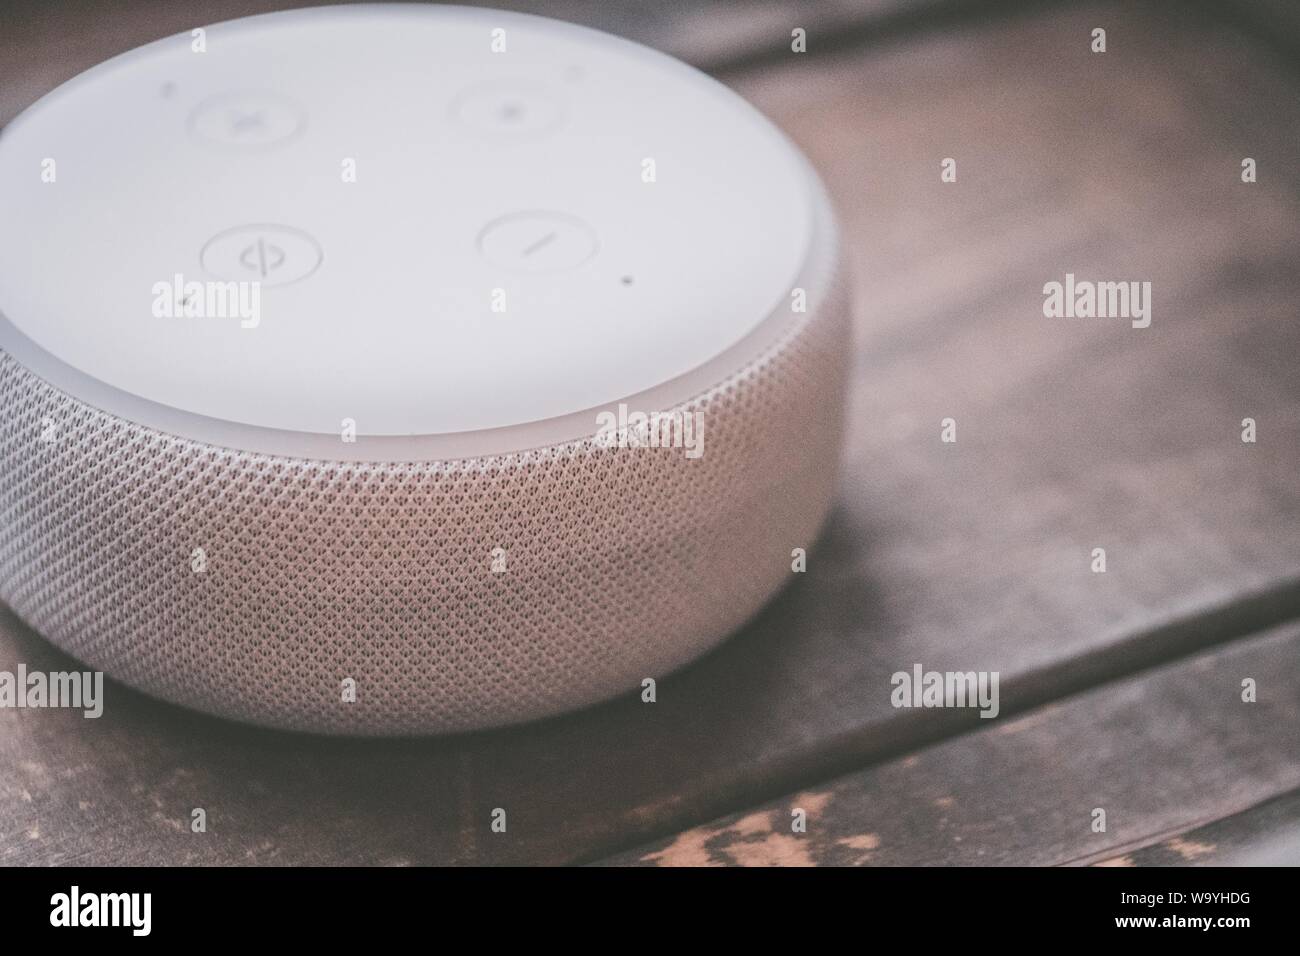 Closeup shot of a round wireless Bluetooth speaker on a wooden surface Stock Photo